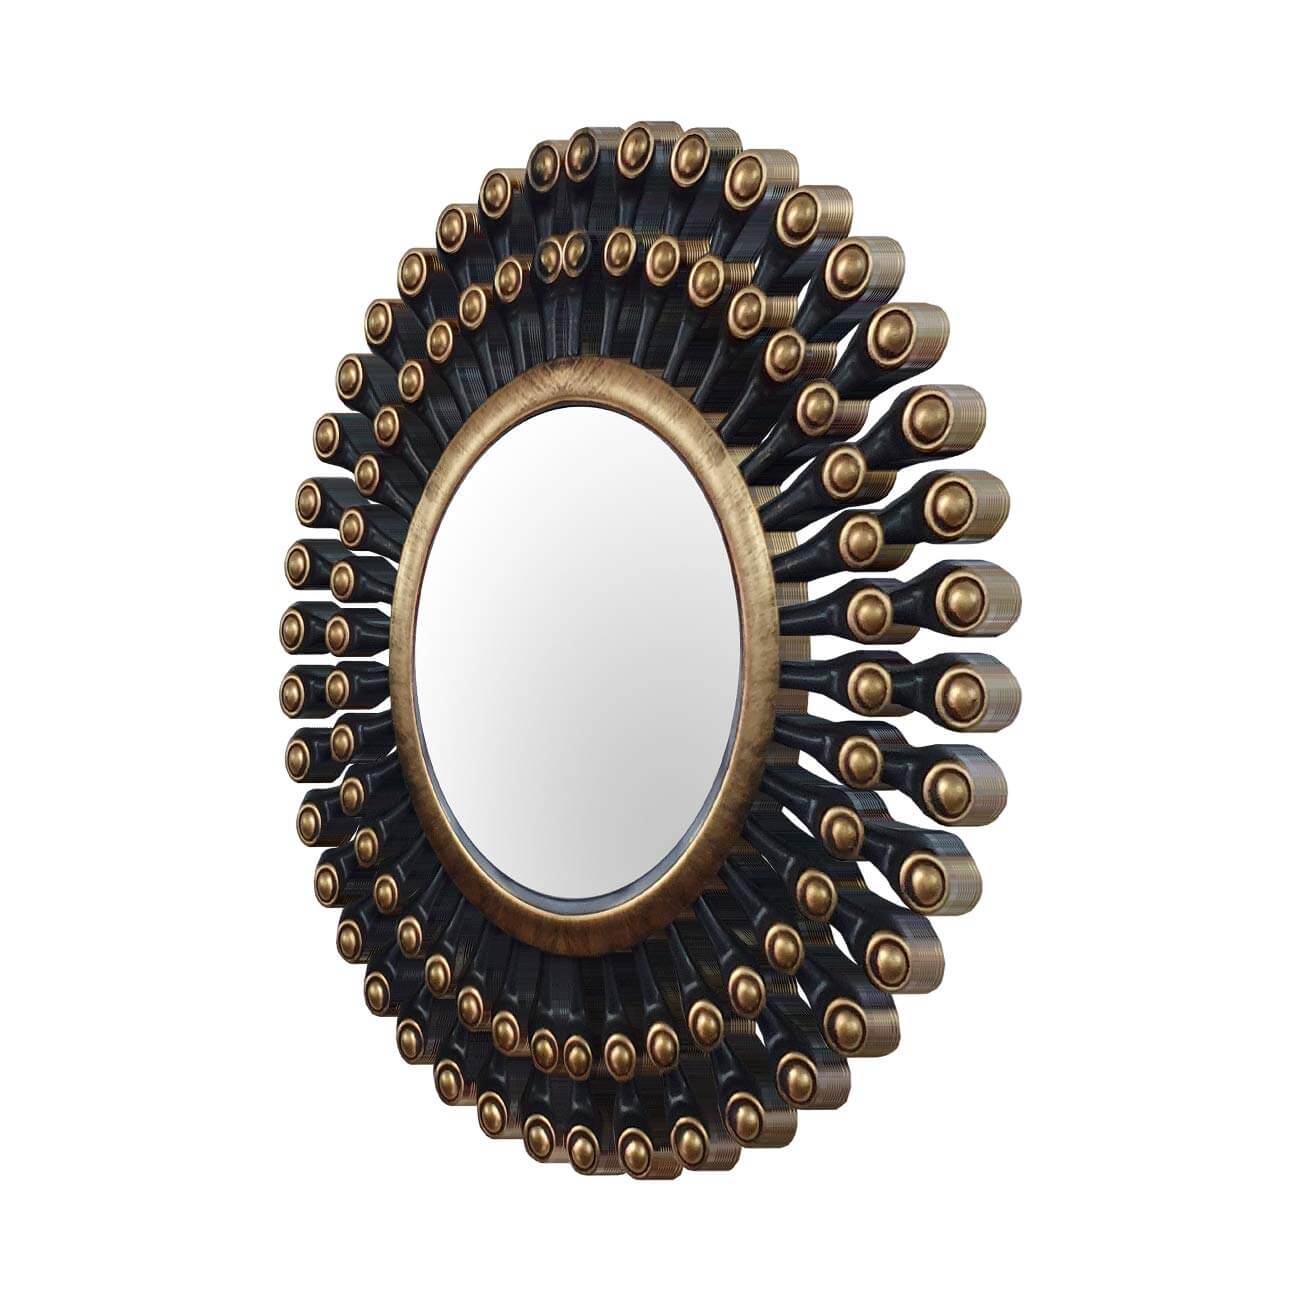 Pack of 3 - Decorative Round Back Gold Wall Mirror for Living Room (Size 10 x 10 Inch) Mangal Fashions | Indian Home Decor and Craft